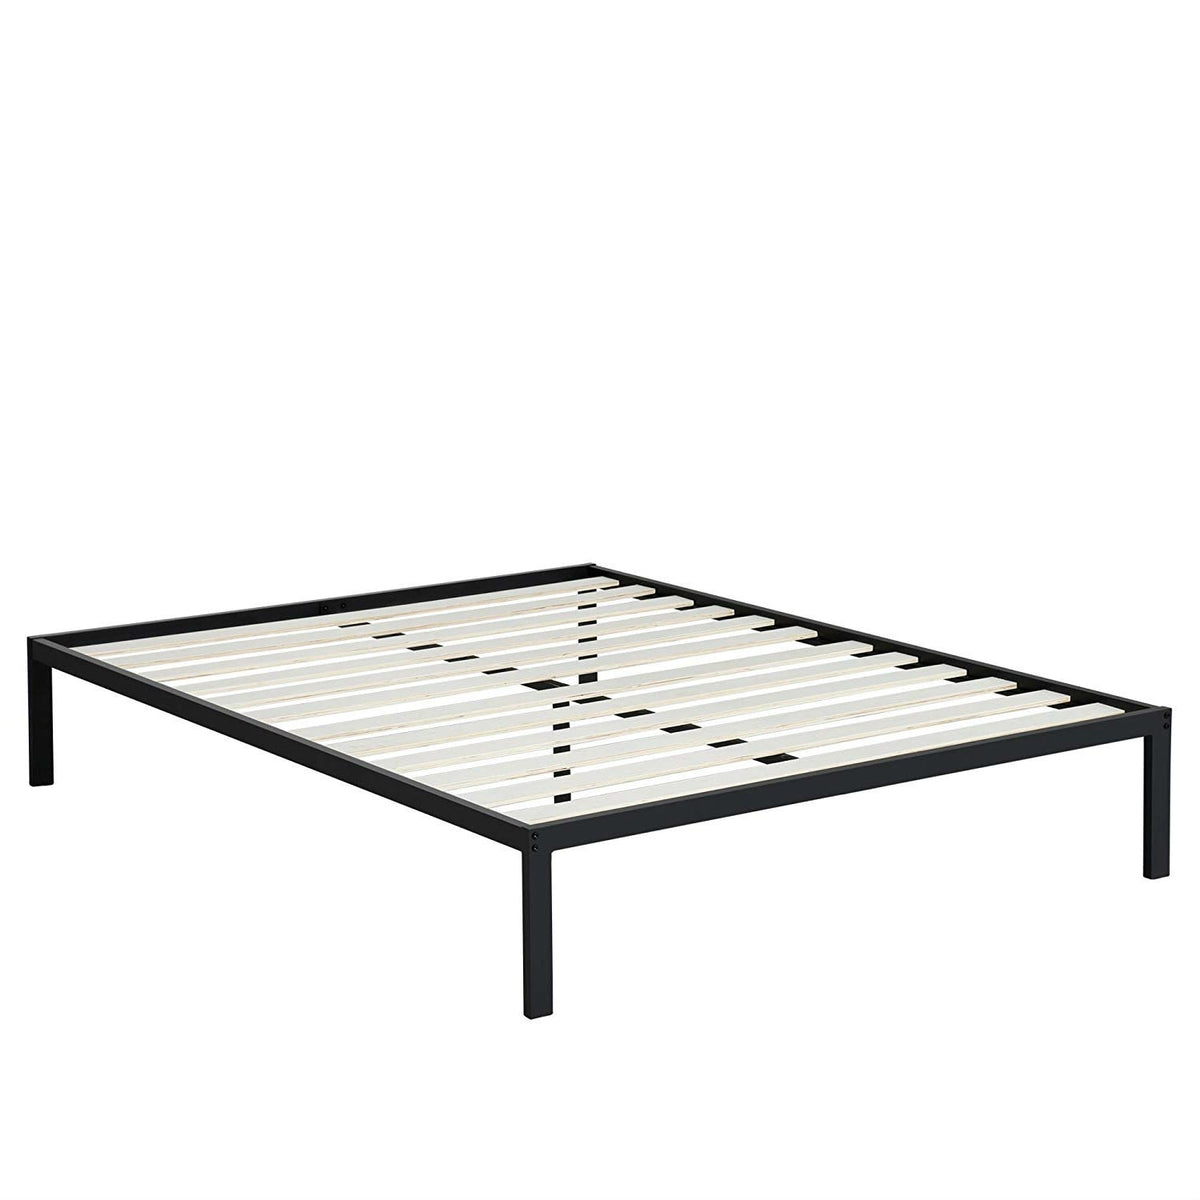 King size Heavy Duty Metal Platform Bed Frame with Wooden Slats